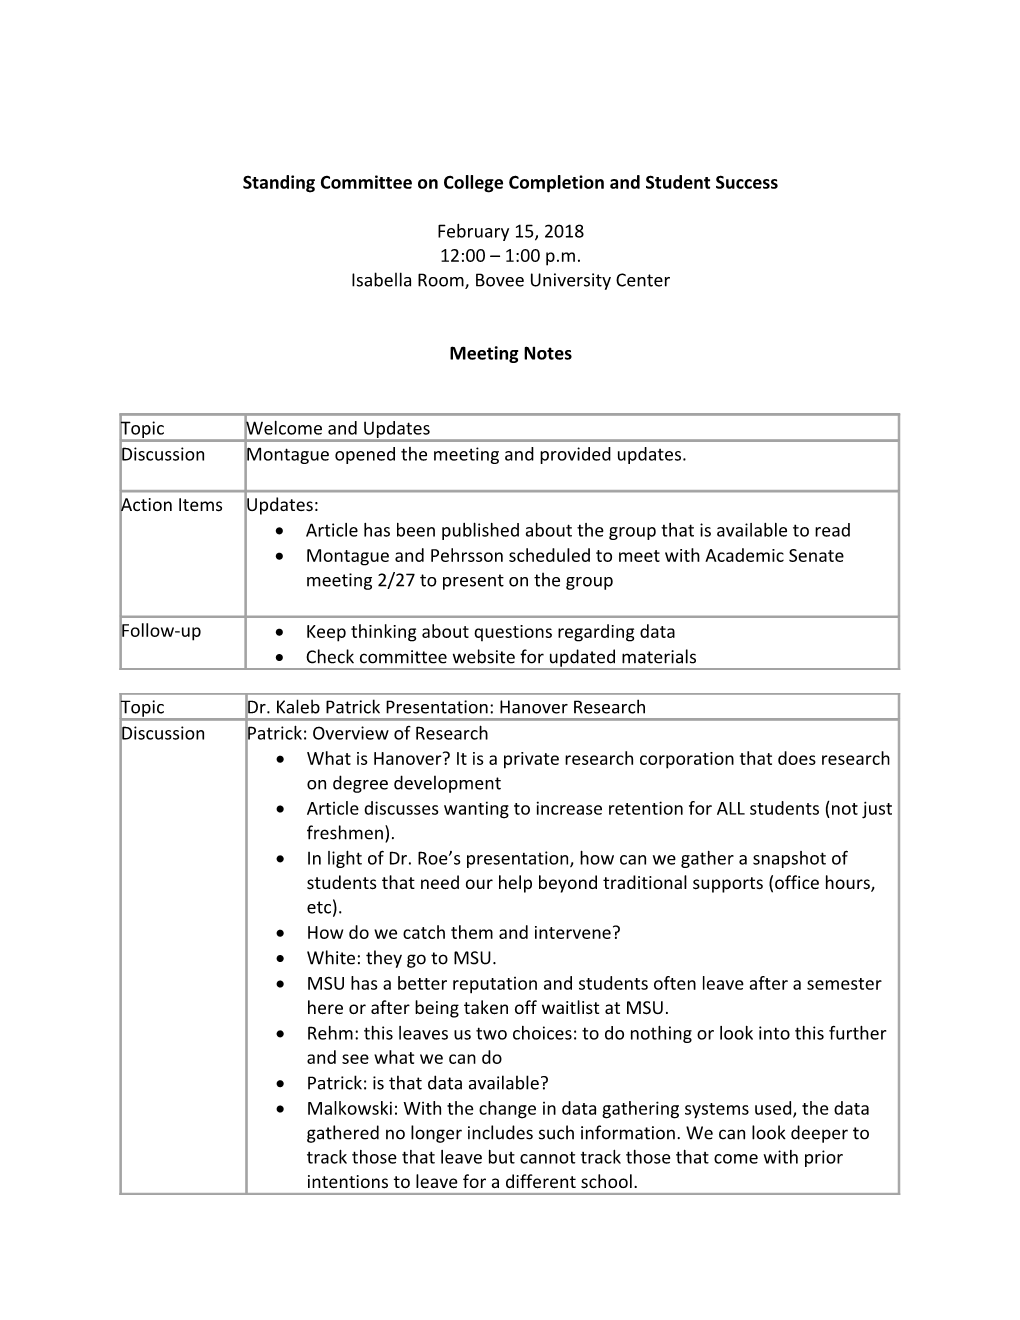 Standing Committee on College Completion and Student Success